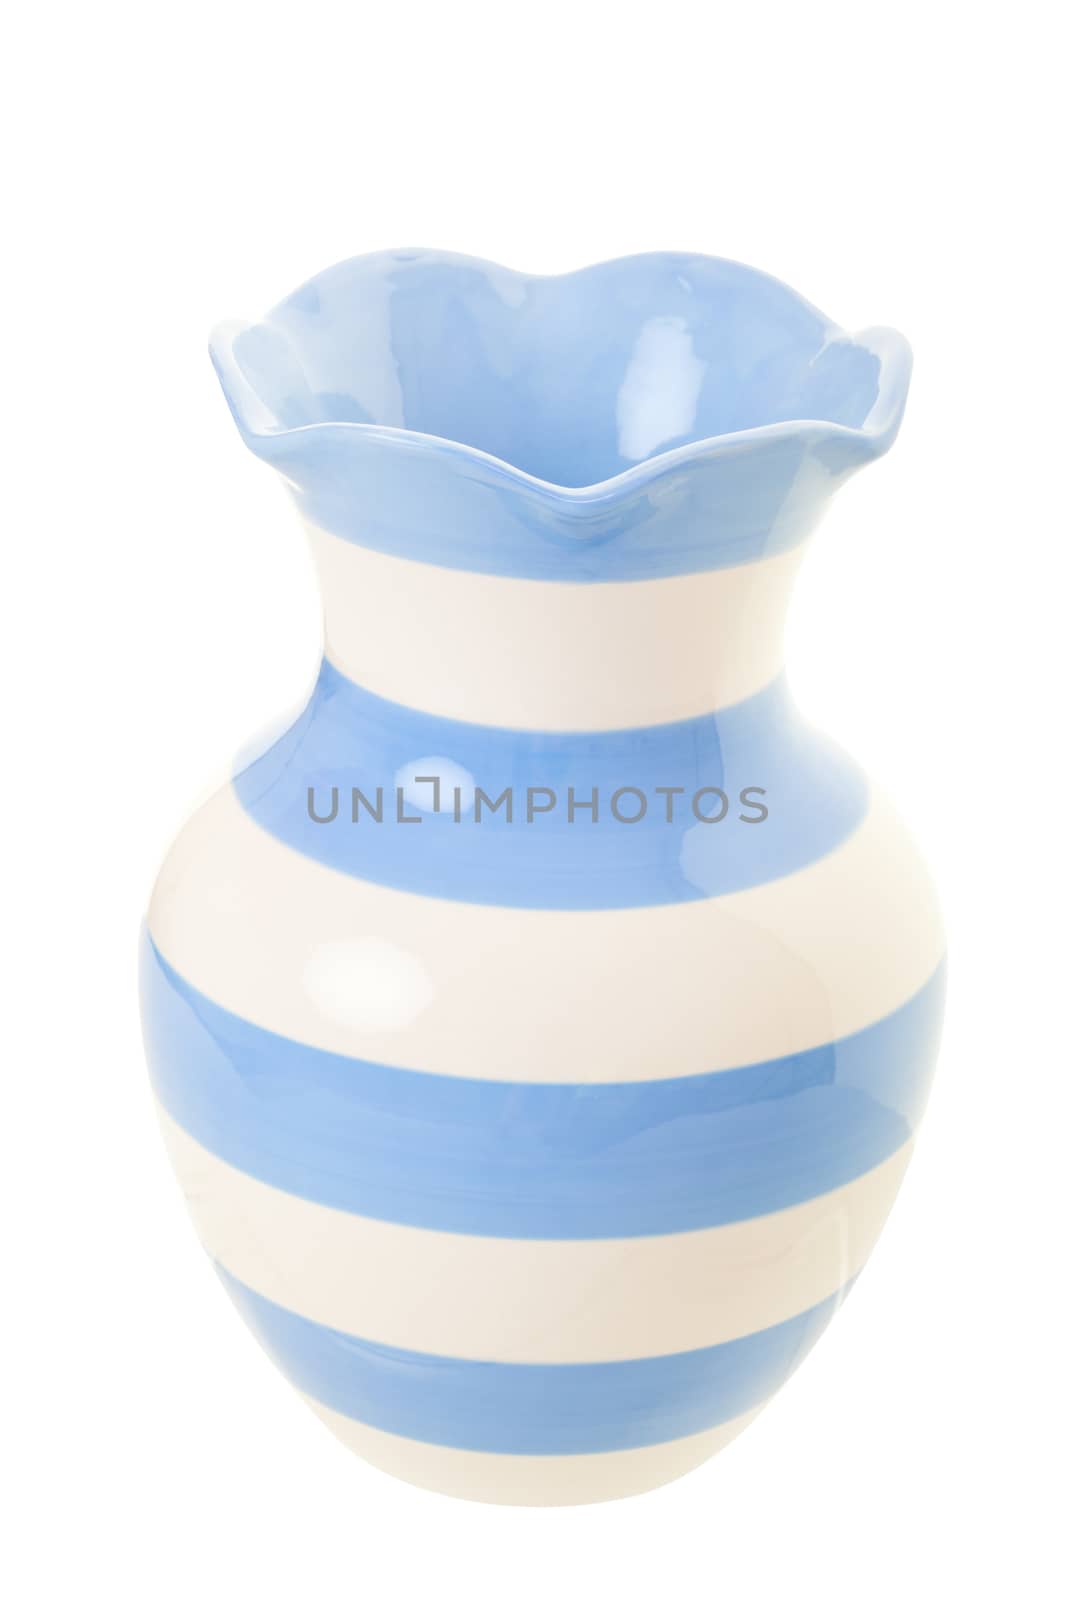 Pale blue and cream striped vase with clipping path.